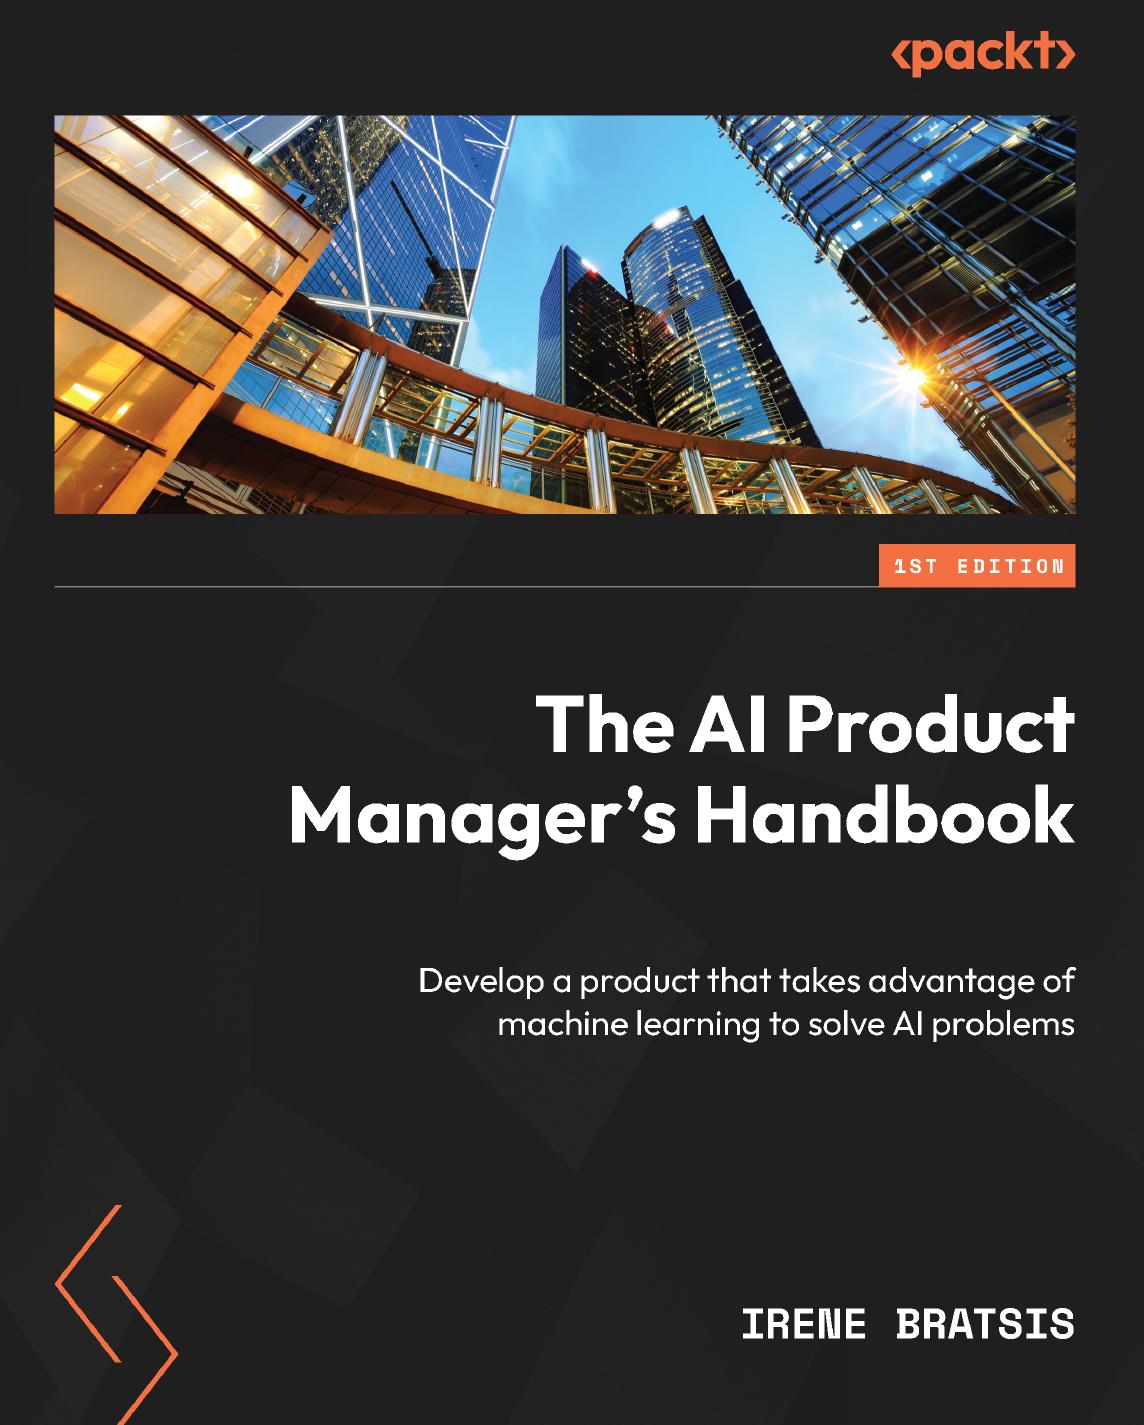 The AI Product Manager's Handbook: Develop a product that takes advantage of machine learning to solve AI problems by Irene Bratsis